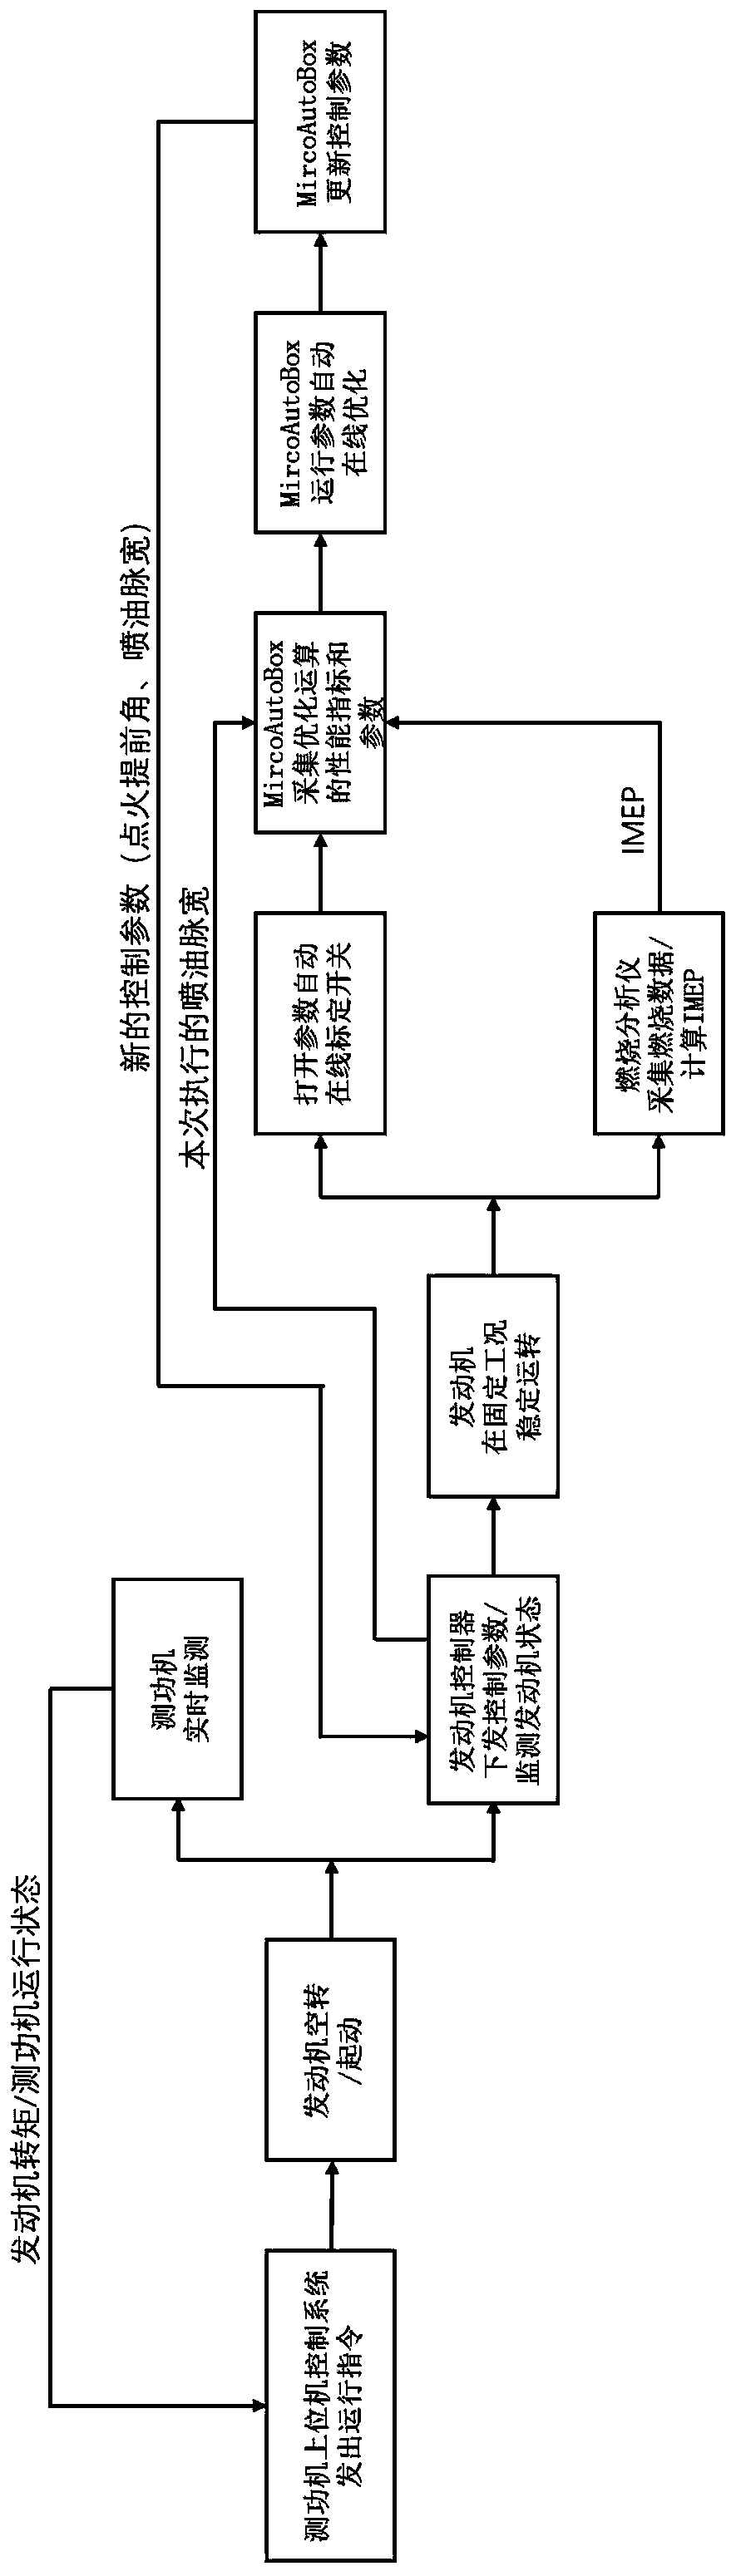 Engine control parameter online calibration device and method combining genetic algorithm and extreme value search algorithm